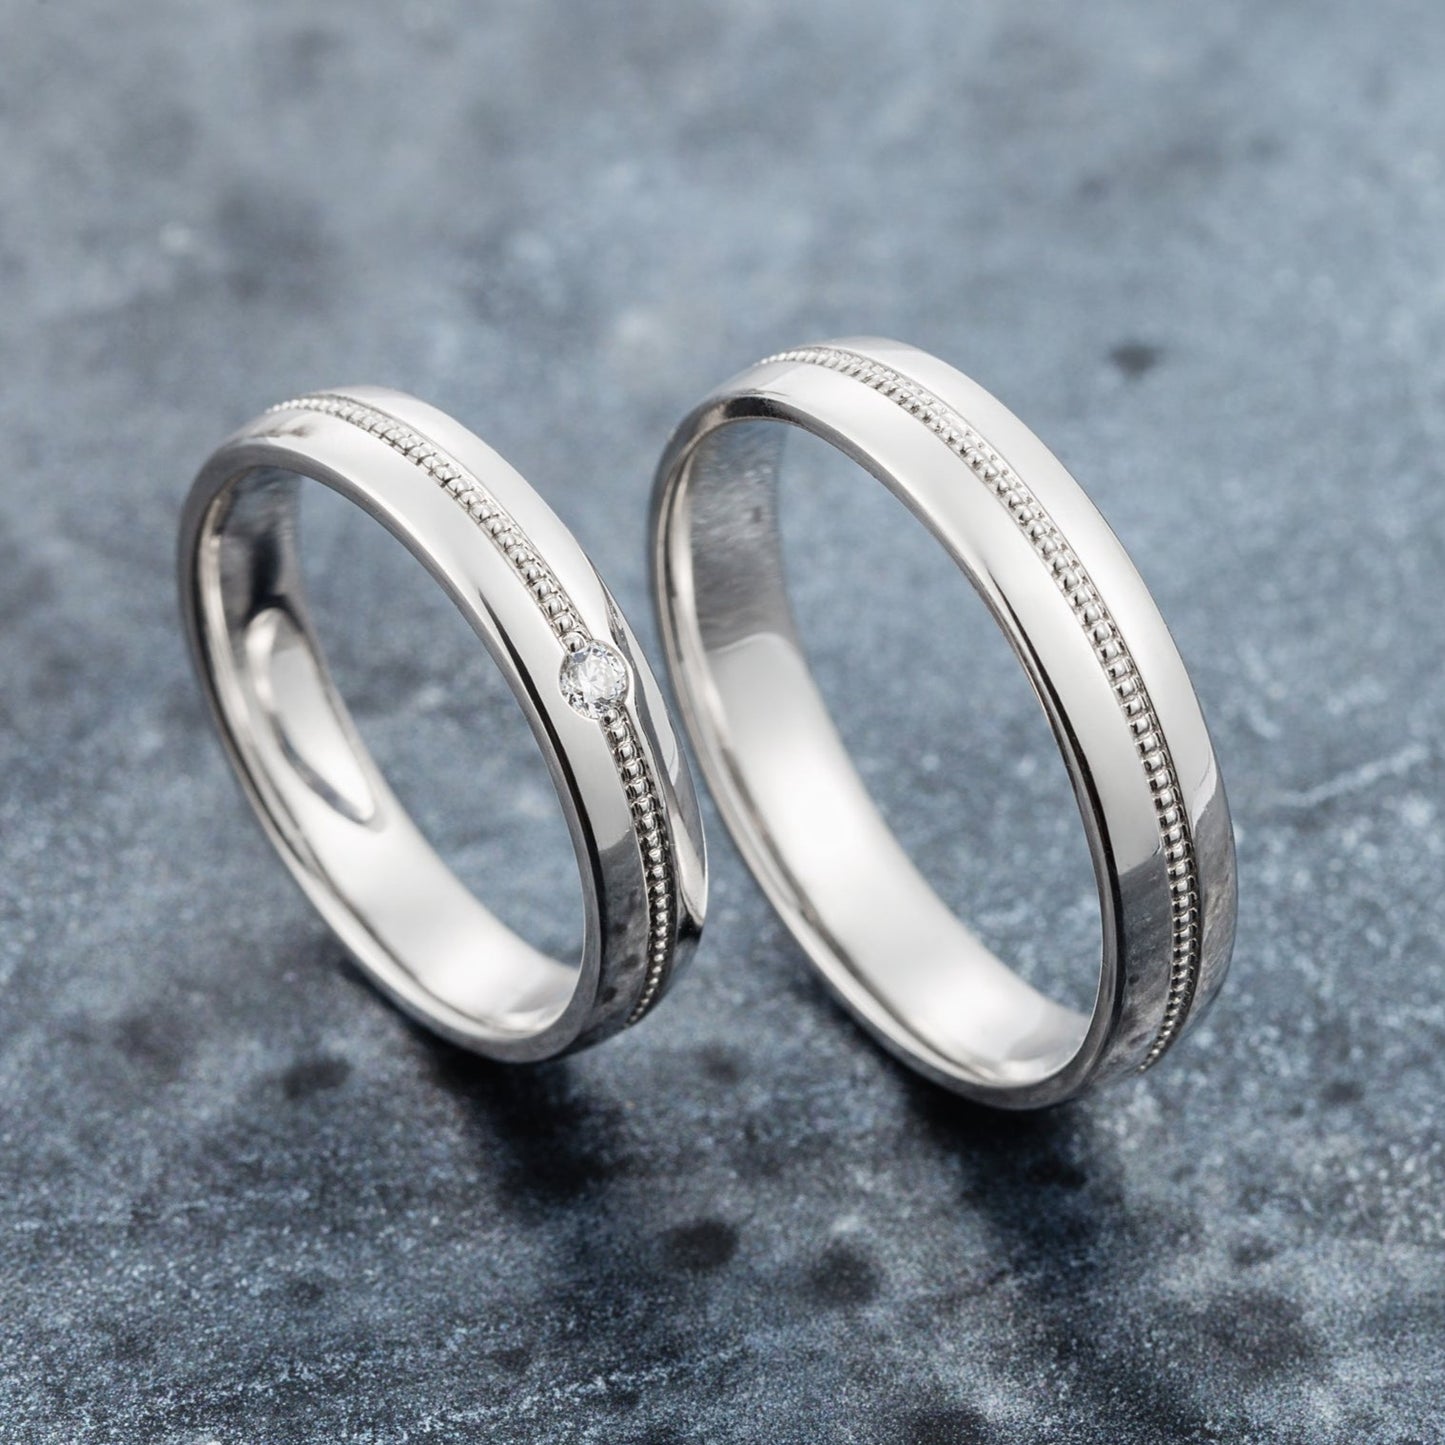 White gold wedding bands with milgrain details. Matching wedding bands. Couple rings. Milgrain diamond bands. White gold wedding bands with diamond. Couple wedding rings set.Wedding rings sets.